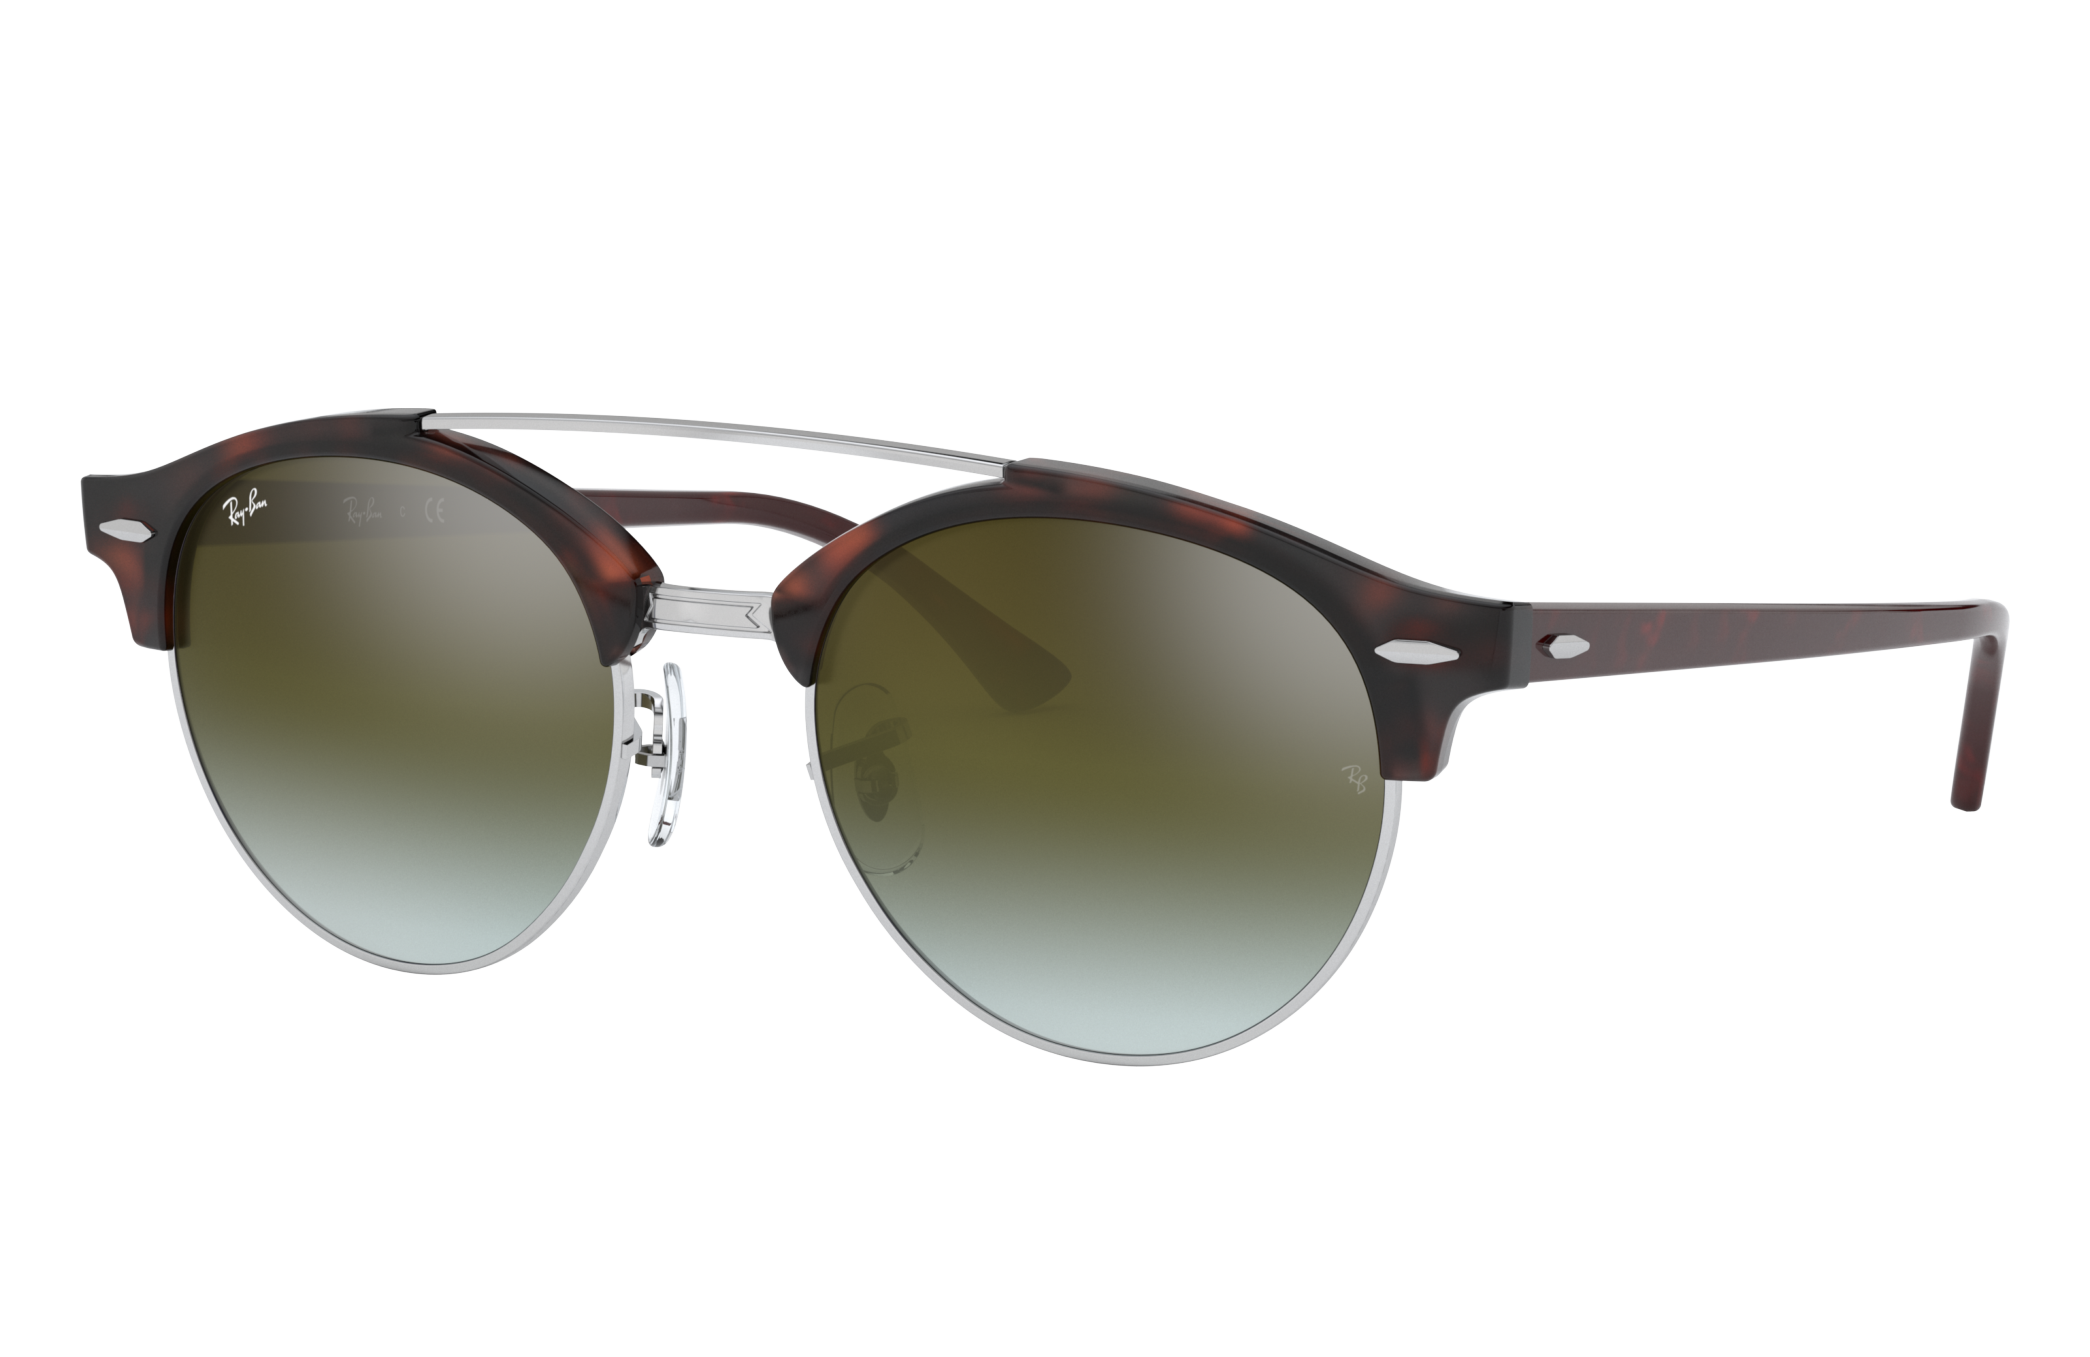 CLUBROUND DOUBLE BRIDGE Sunglasses in Shiny Red Havana and Green 